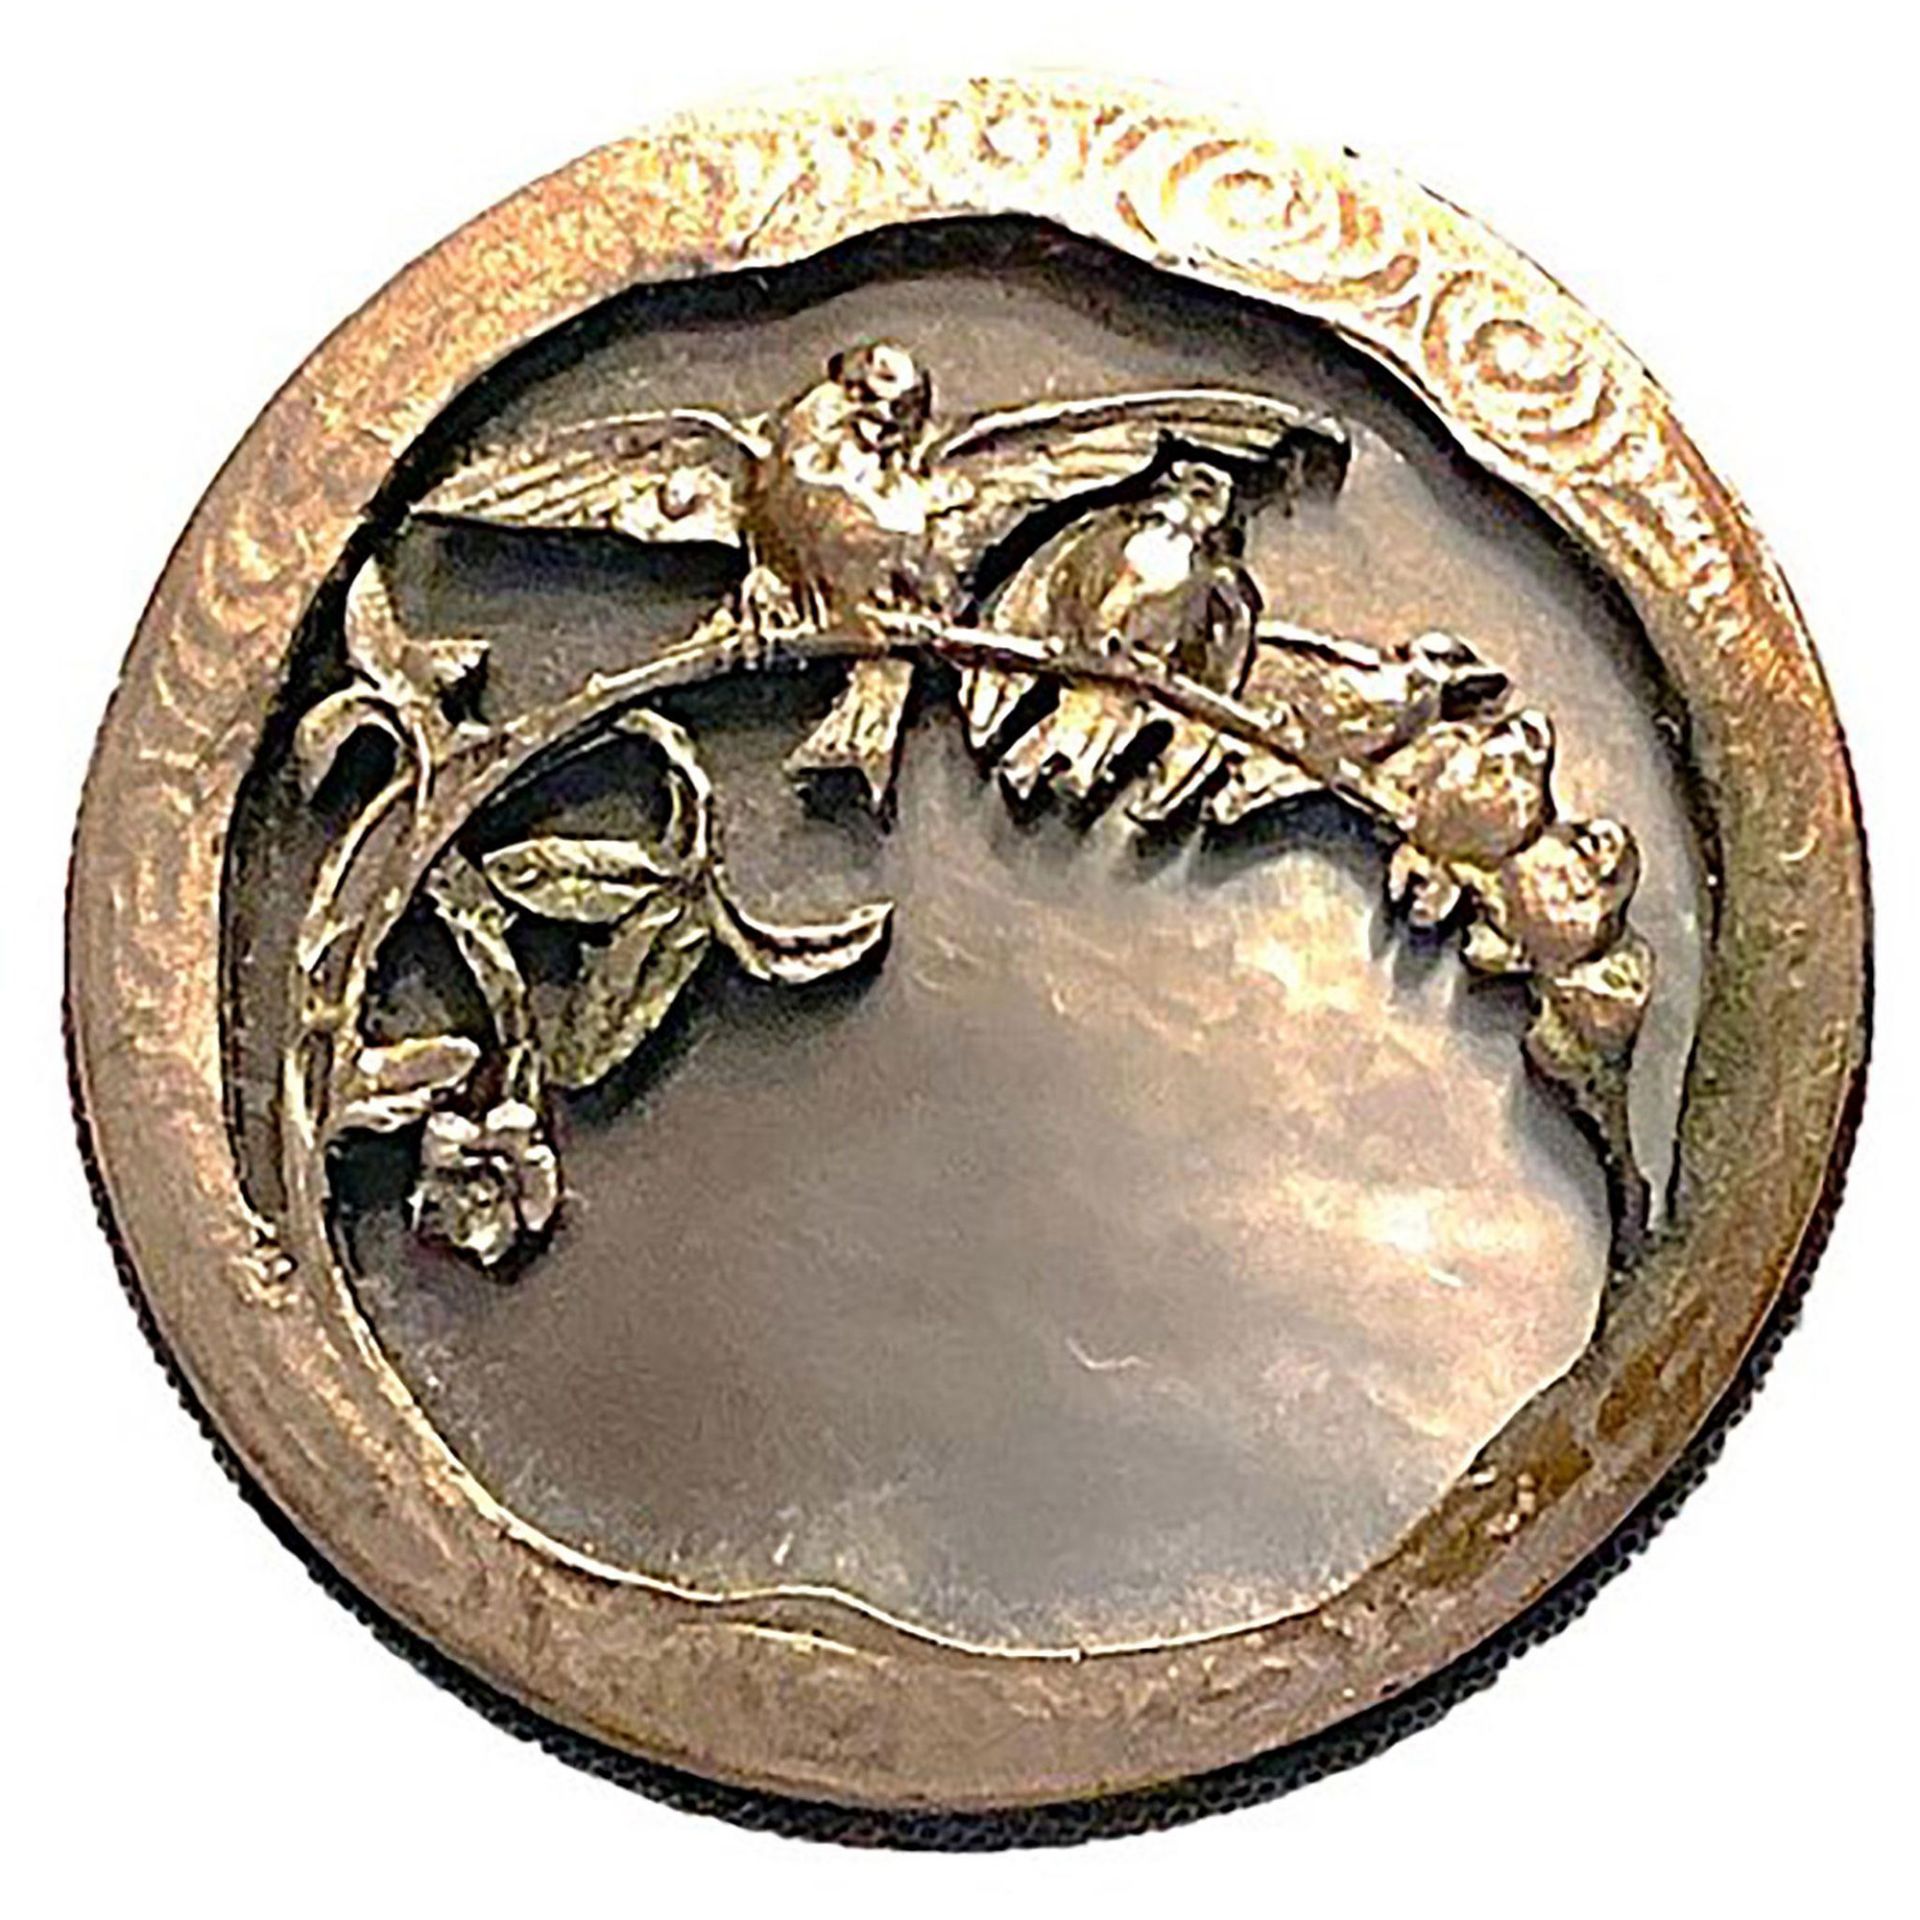 A division one pearl in metal pictorial button